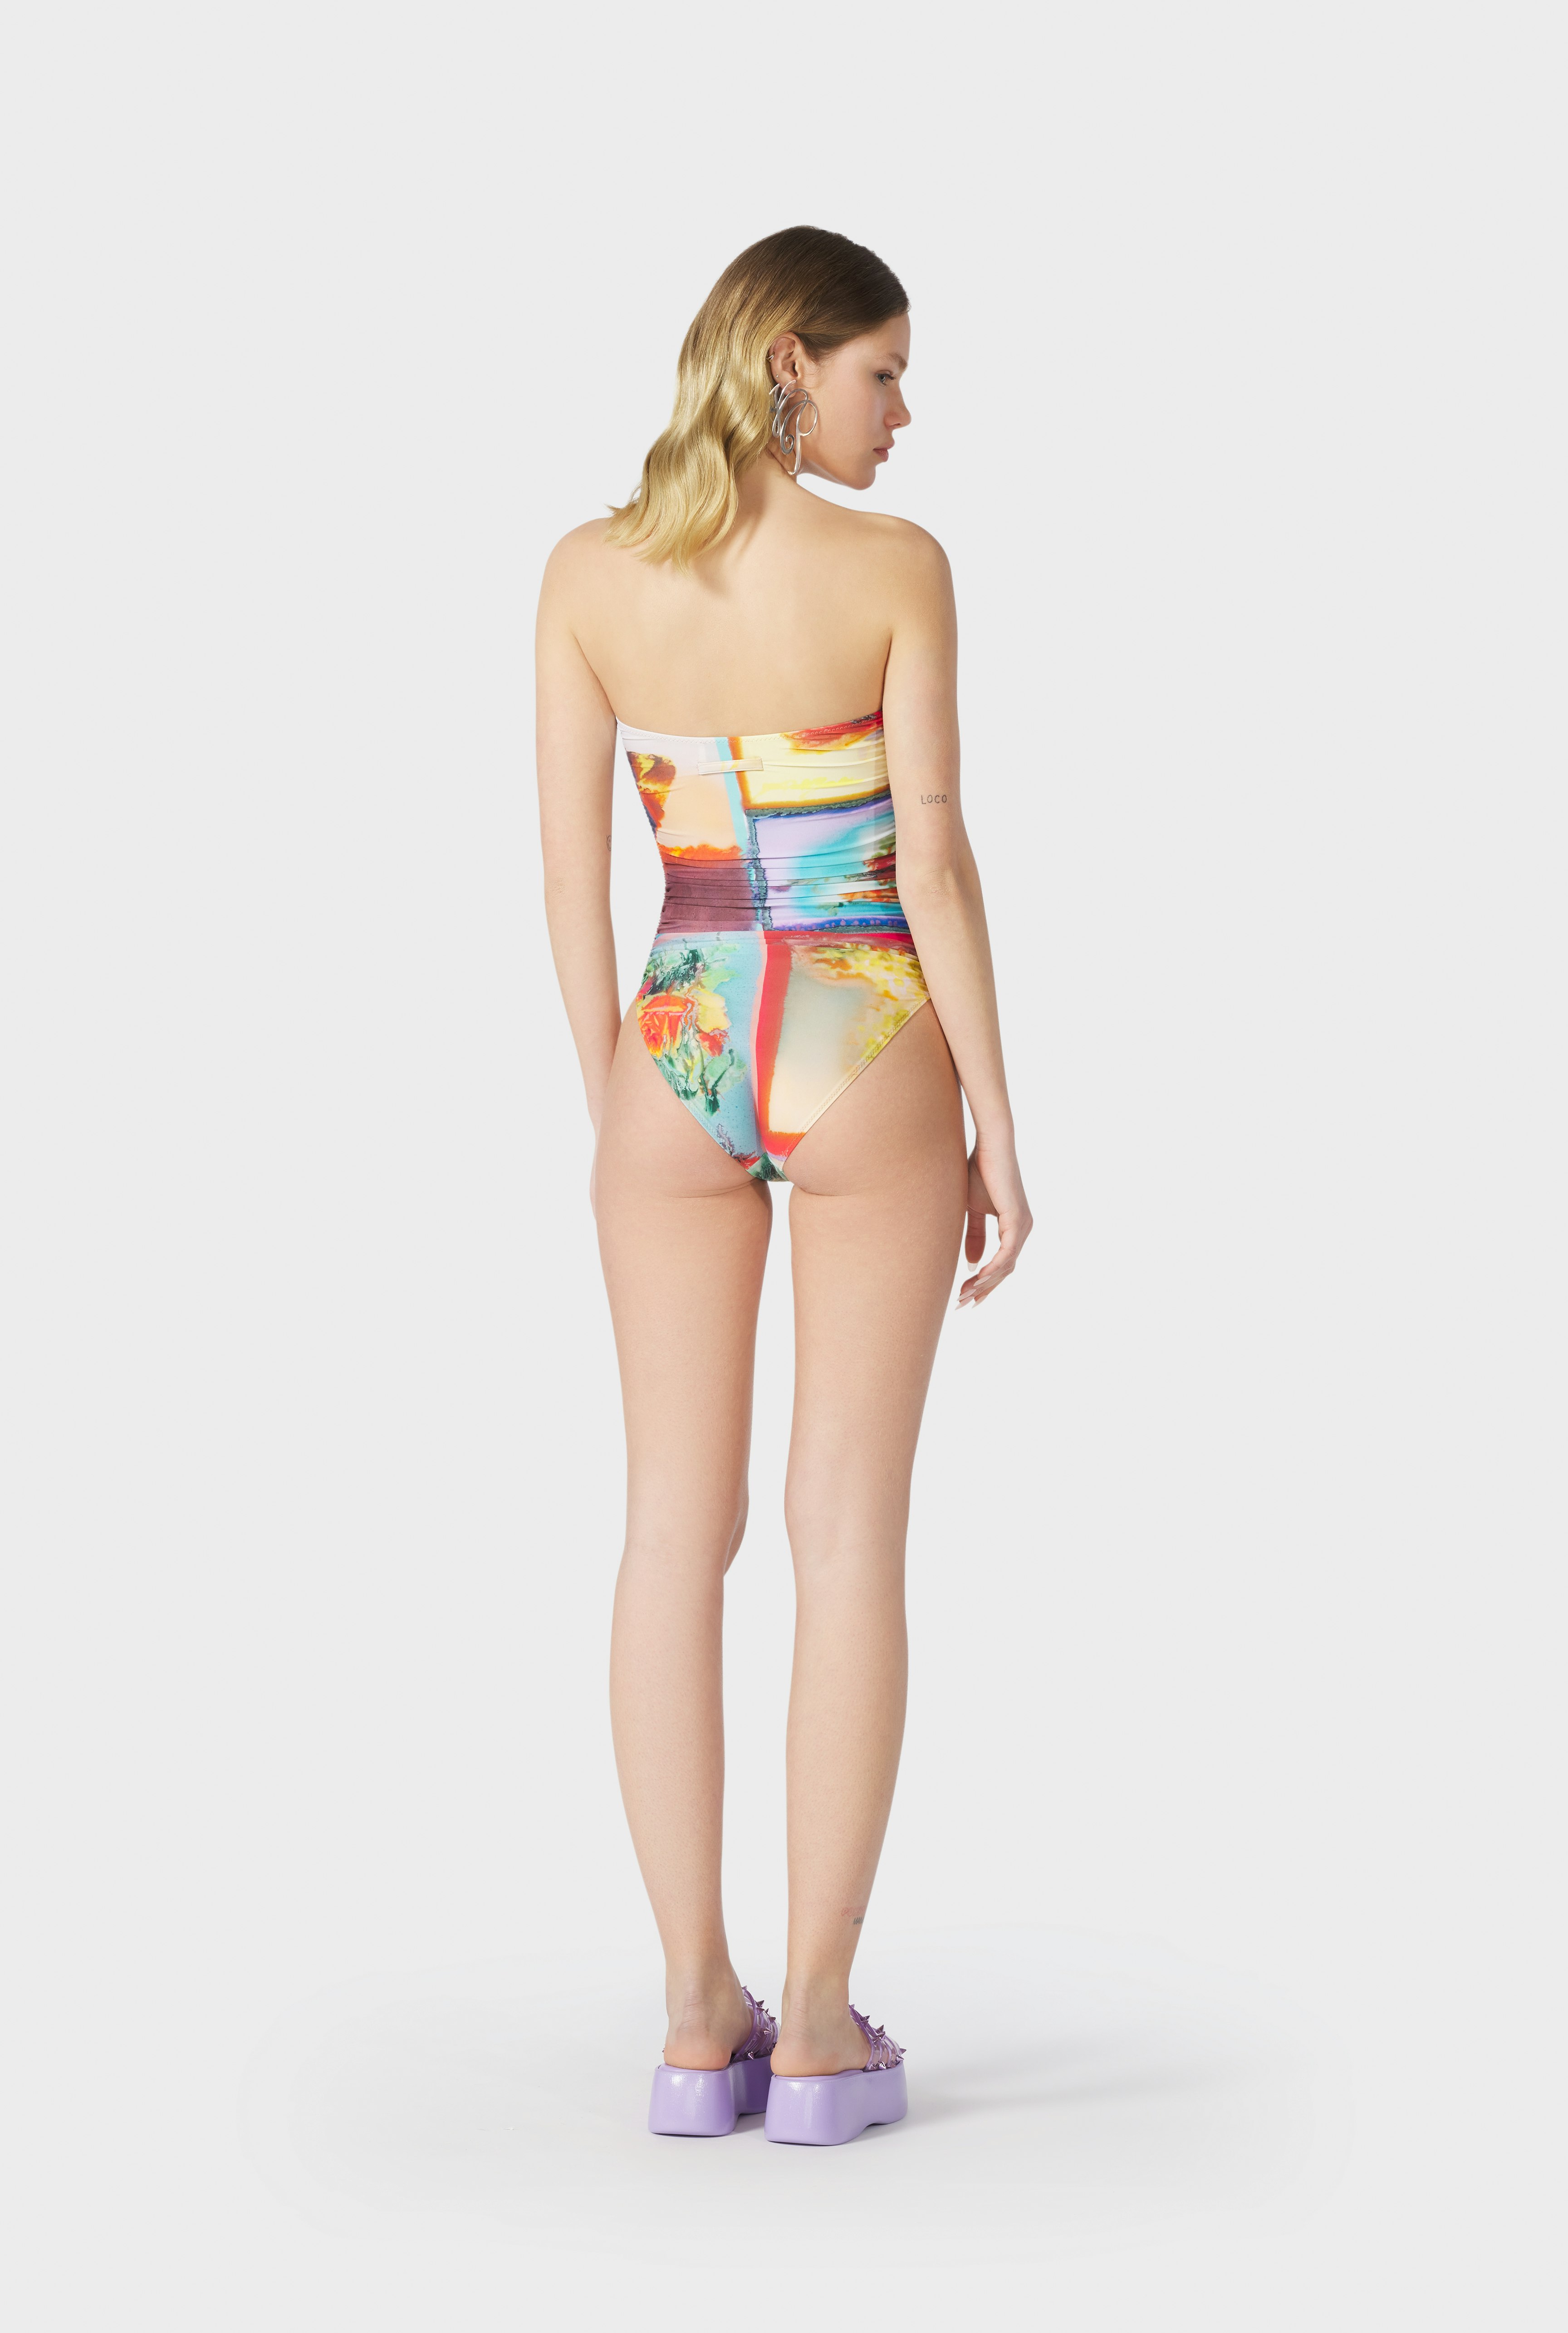 The Scarf Swimsuit